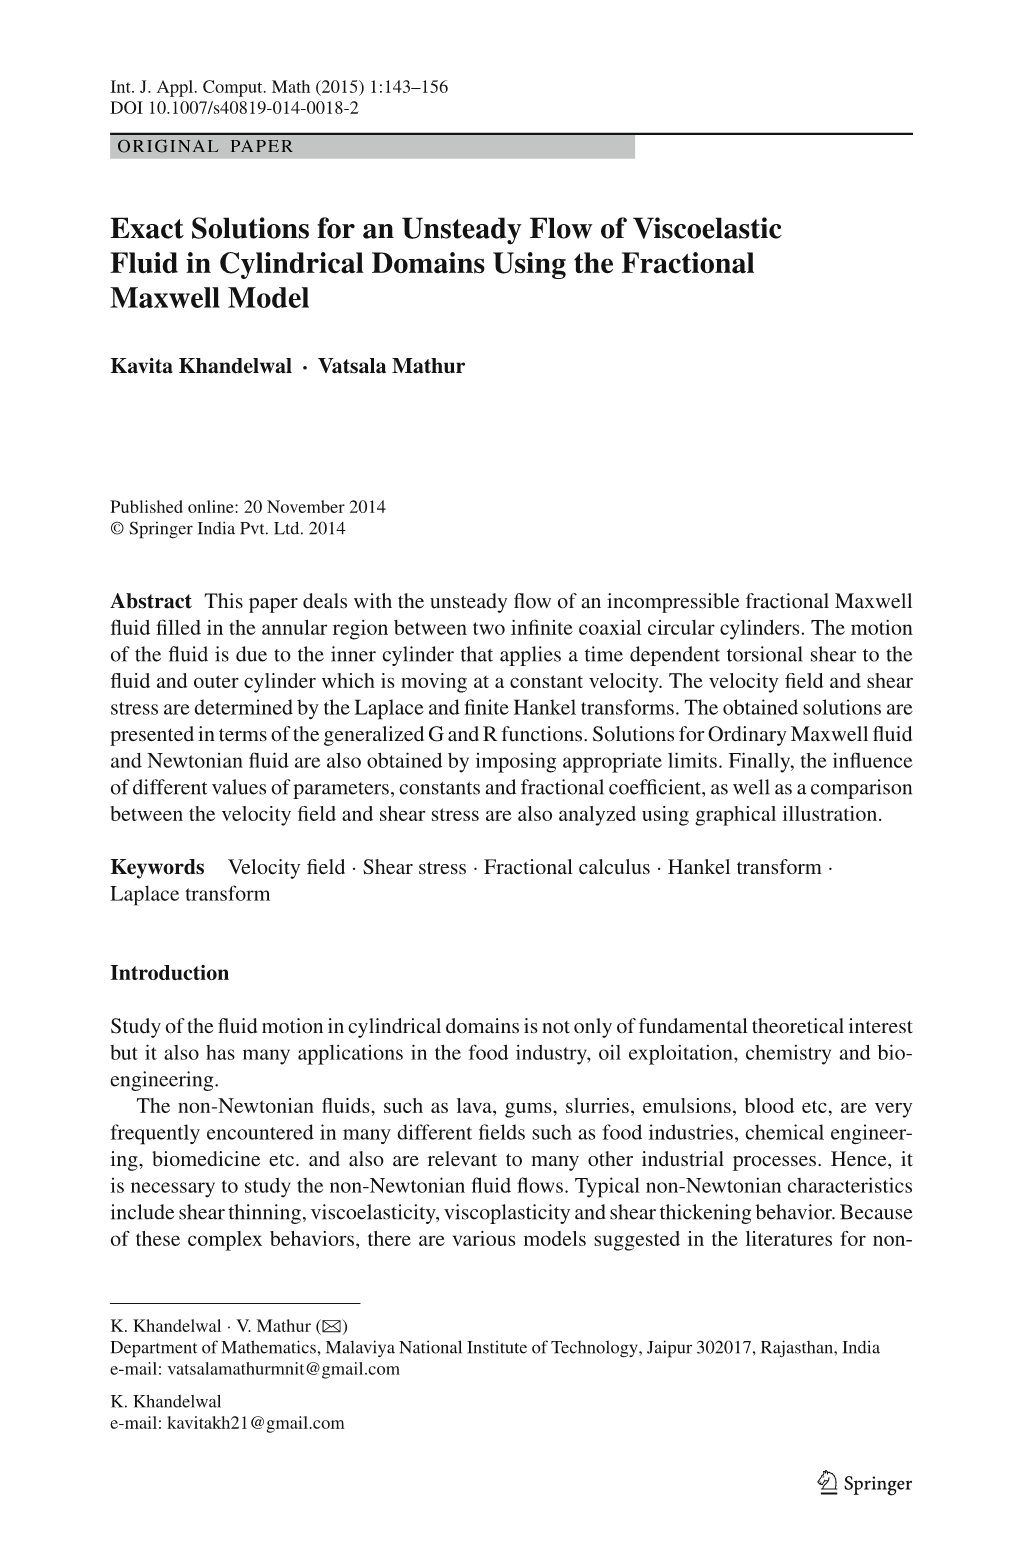 Exact Solutions for an Unsteady Flow of Viscoelastic Fluid in Cylindrical Domains Using the Fractional Maxwell Model